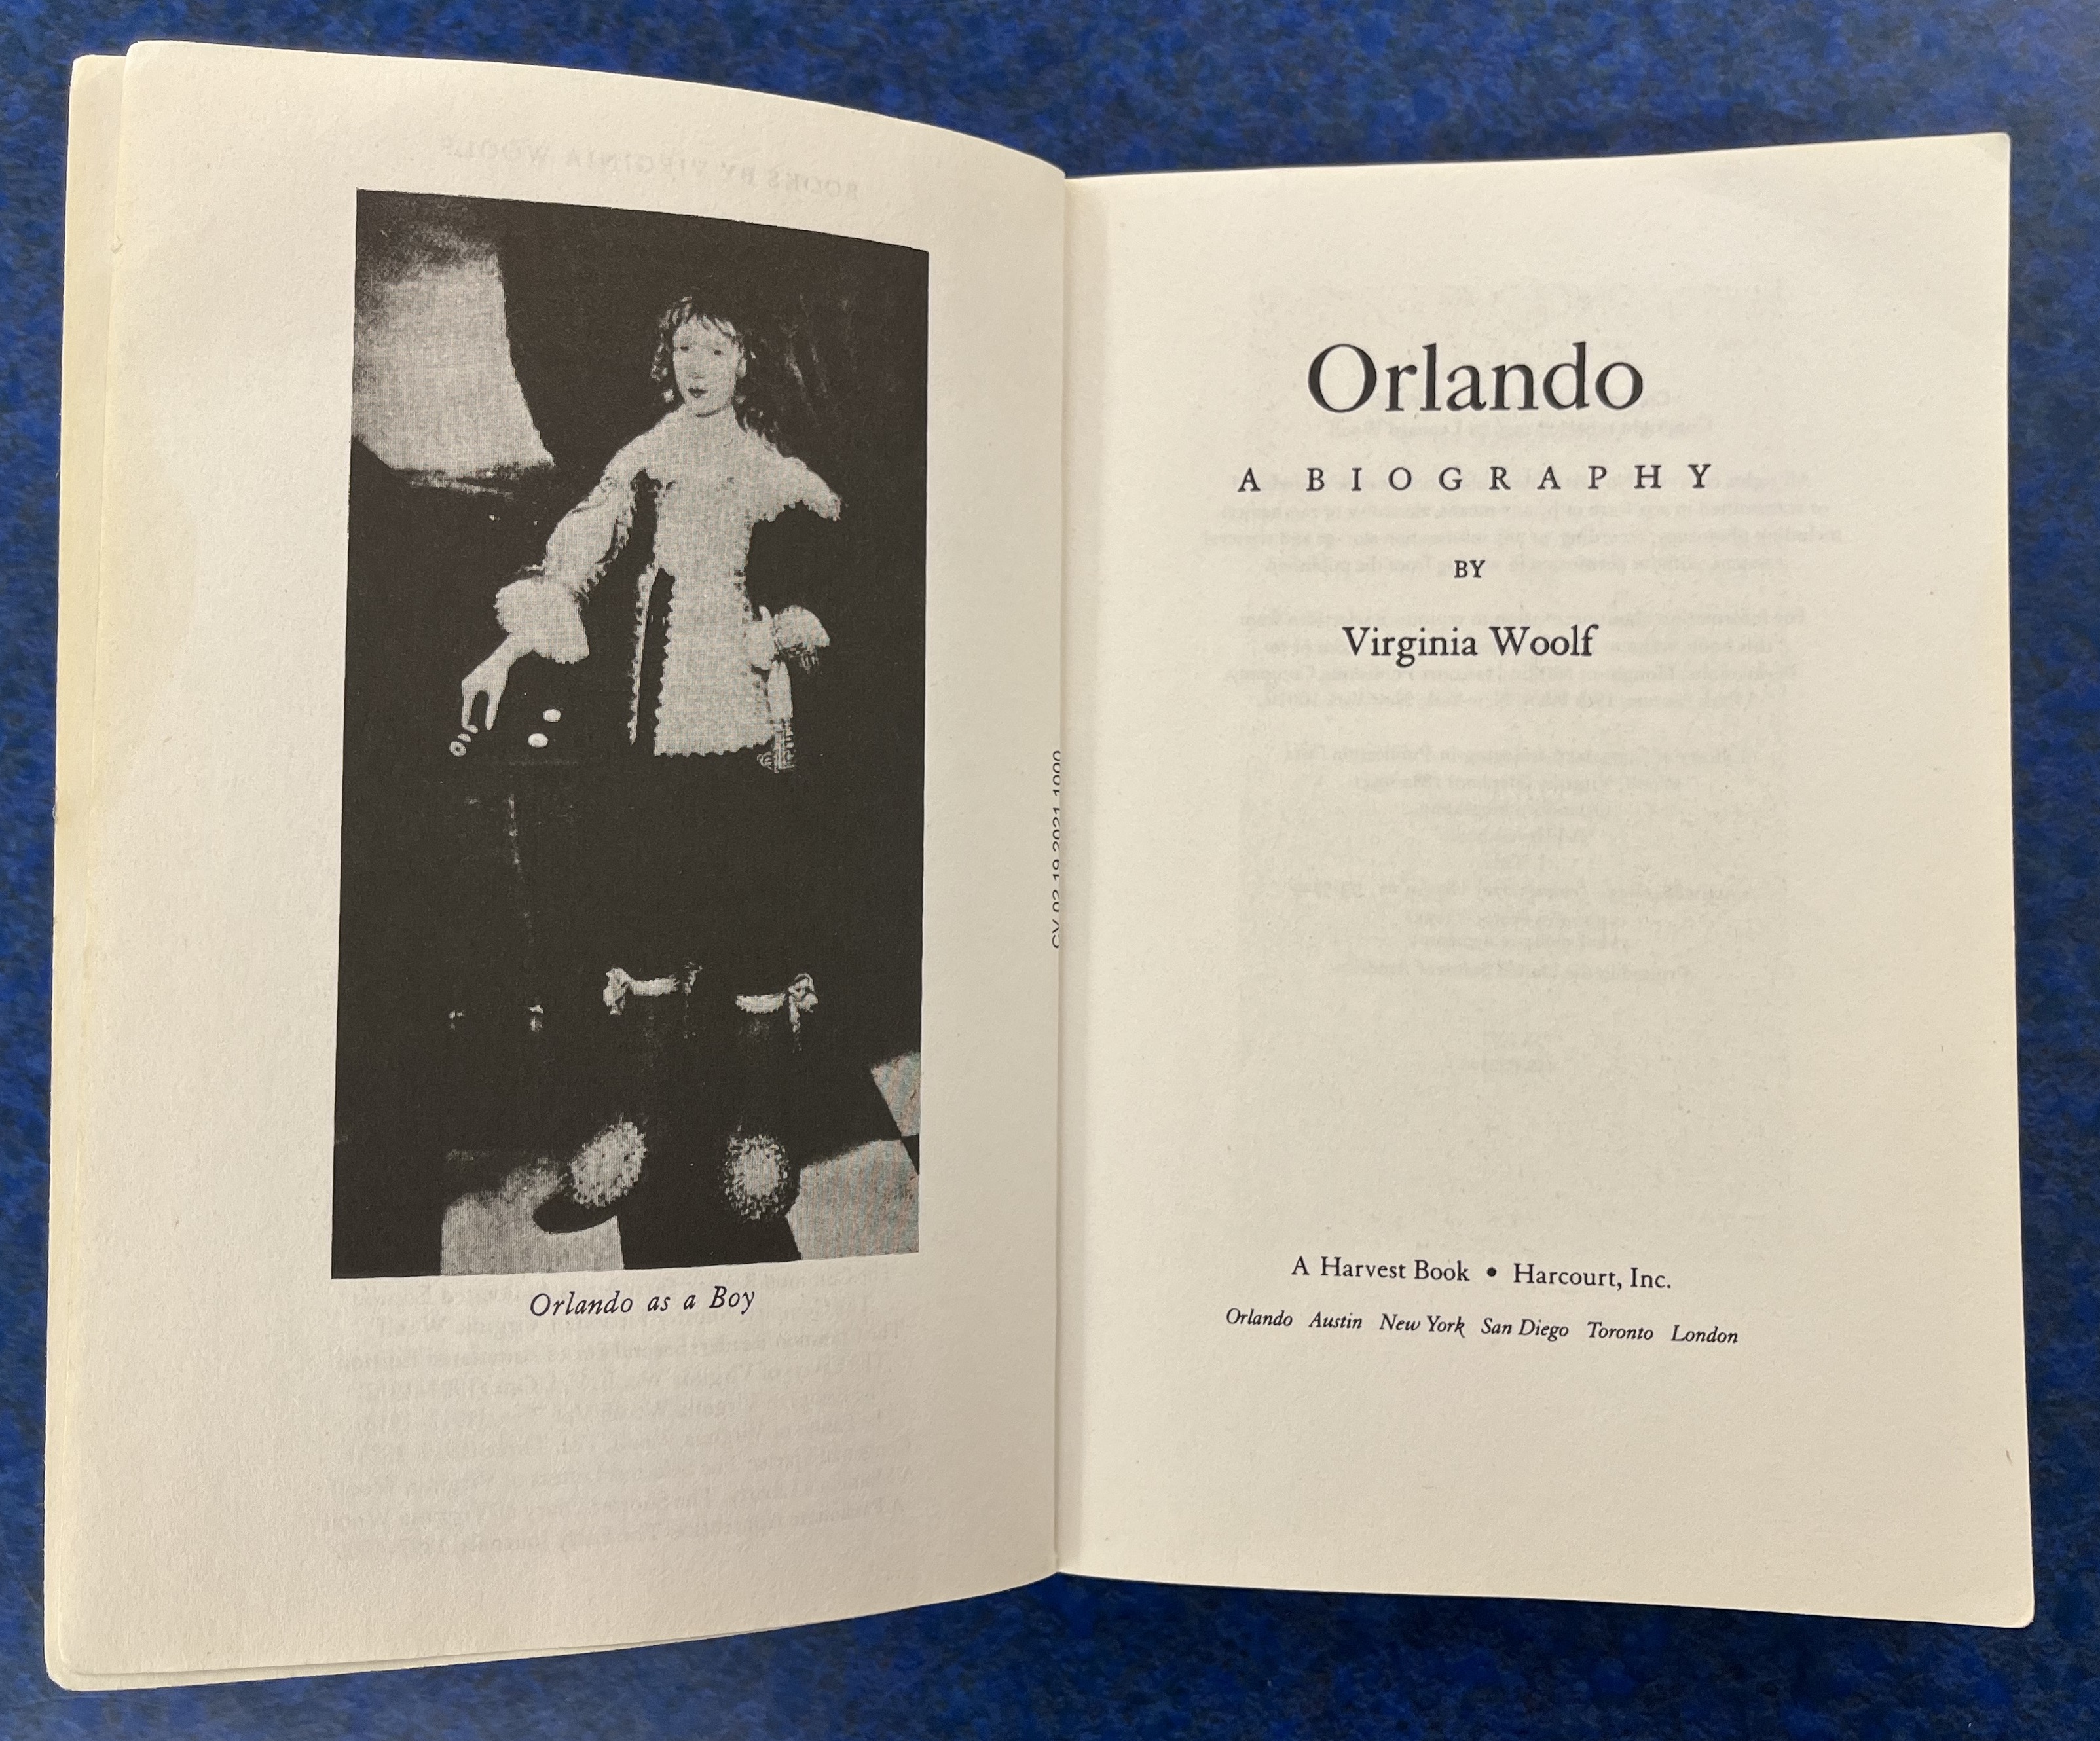 Orlando book with open pages